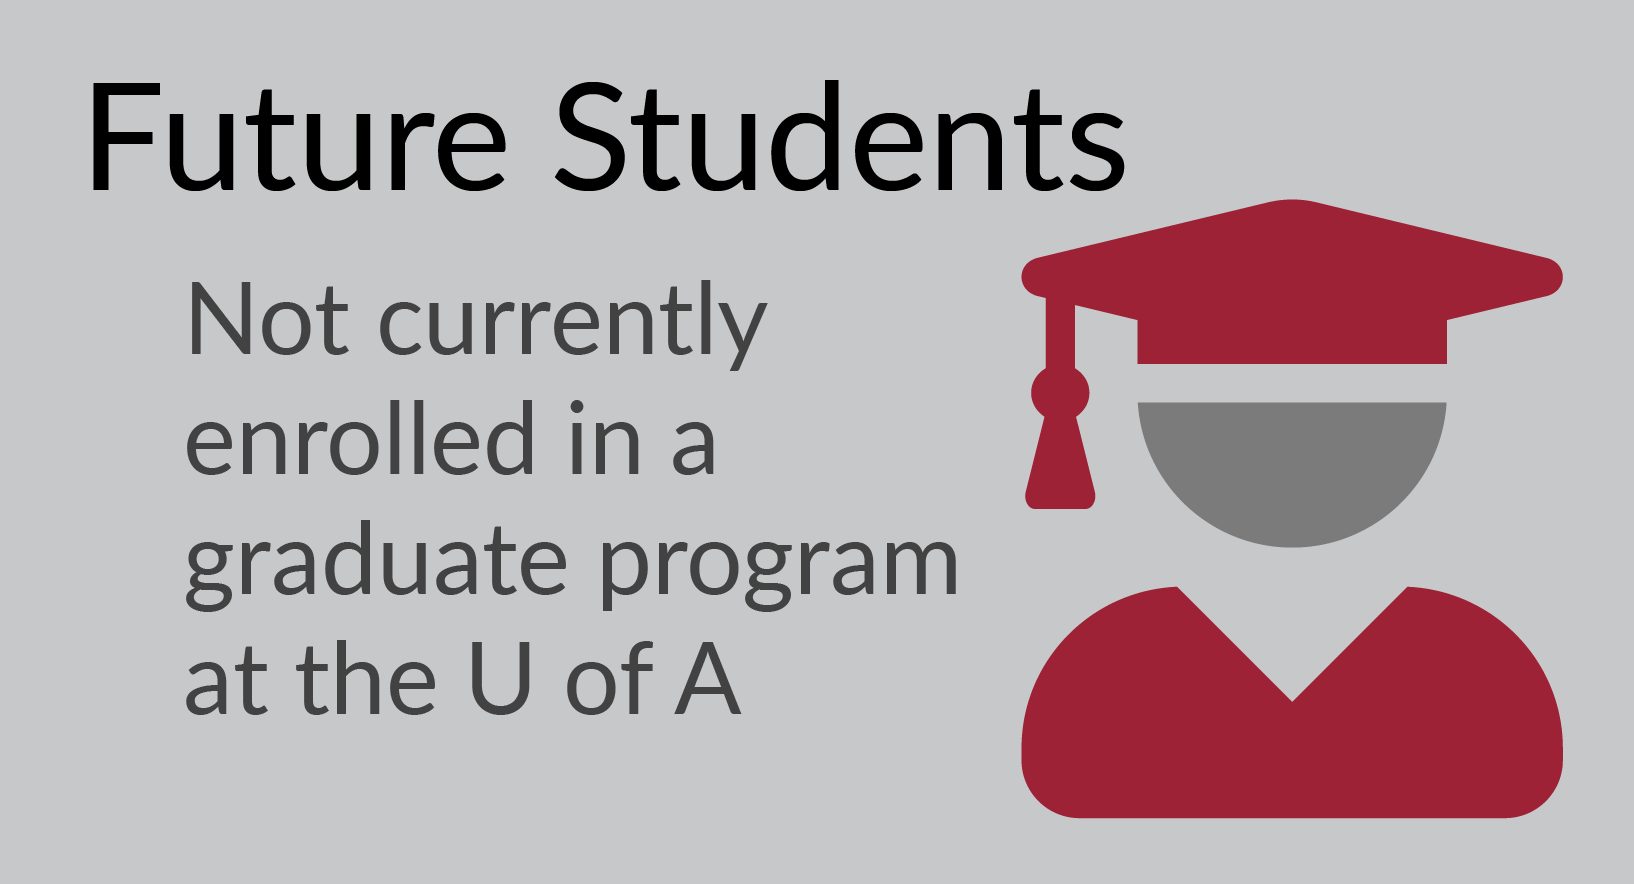 Future Students: Students not currently enrolled in a graduate program at the U of A